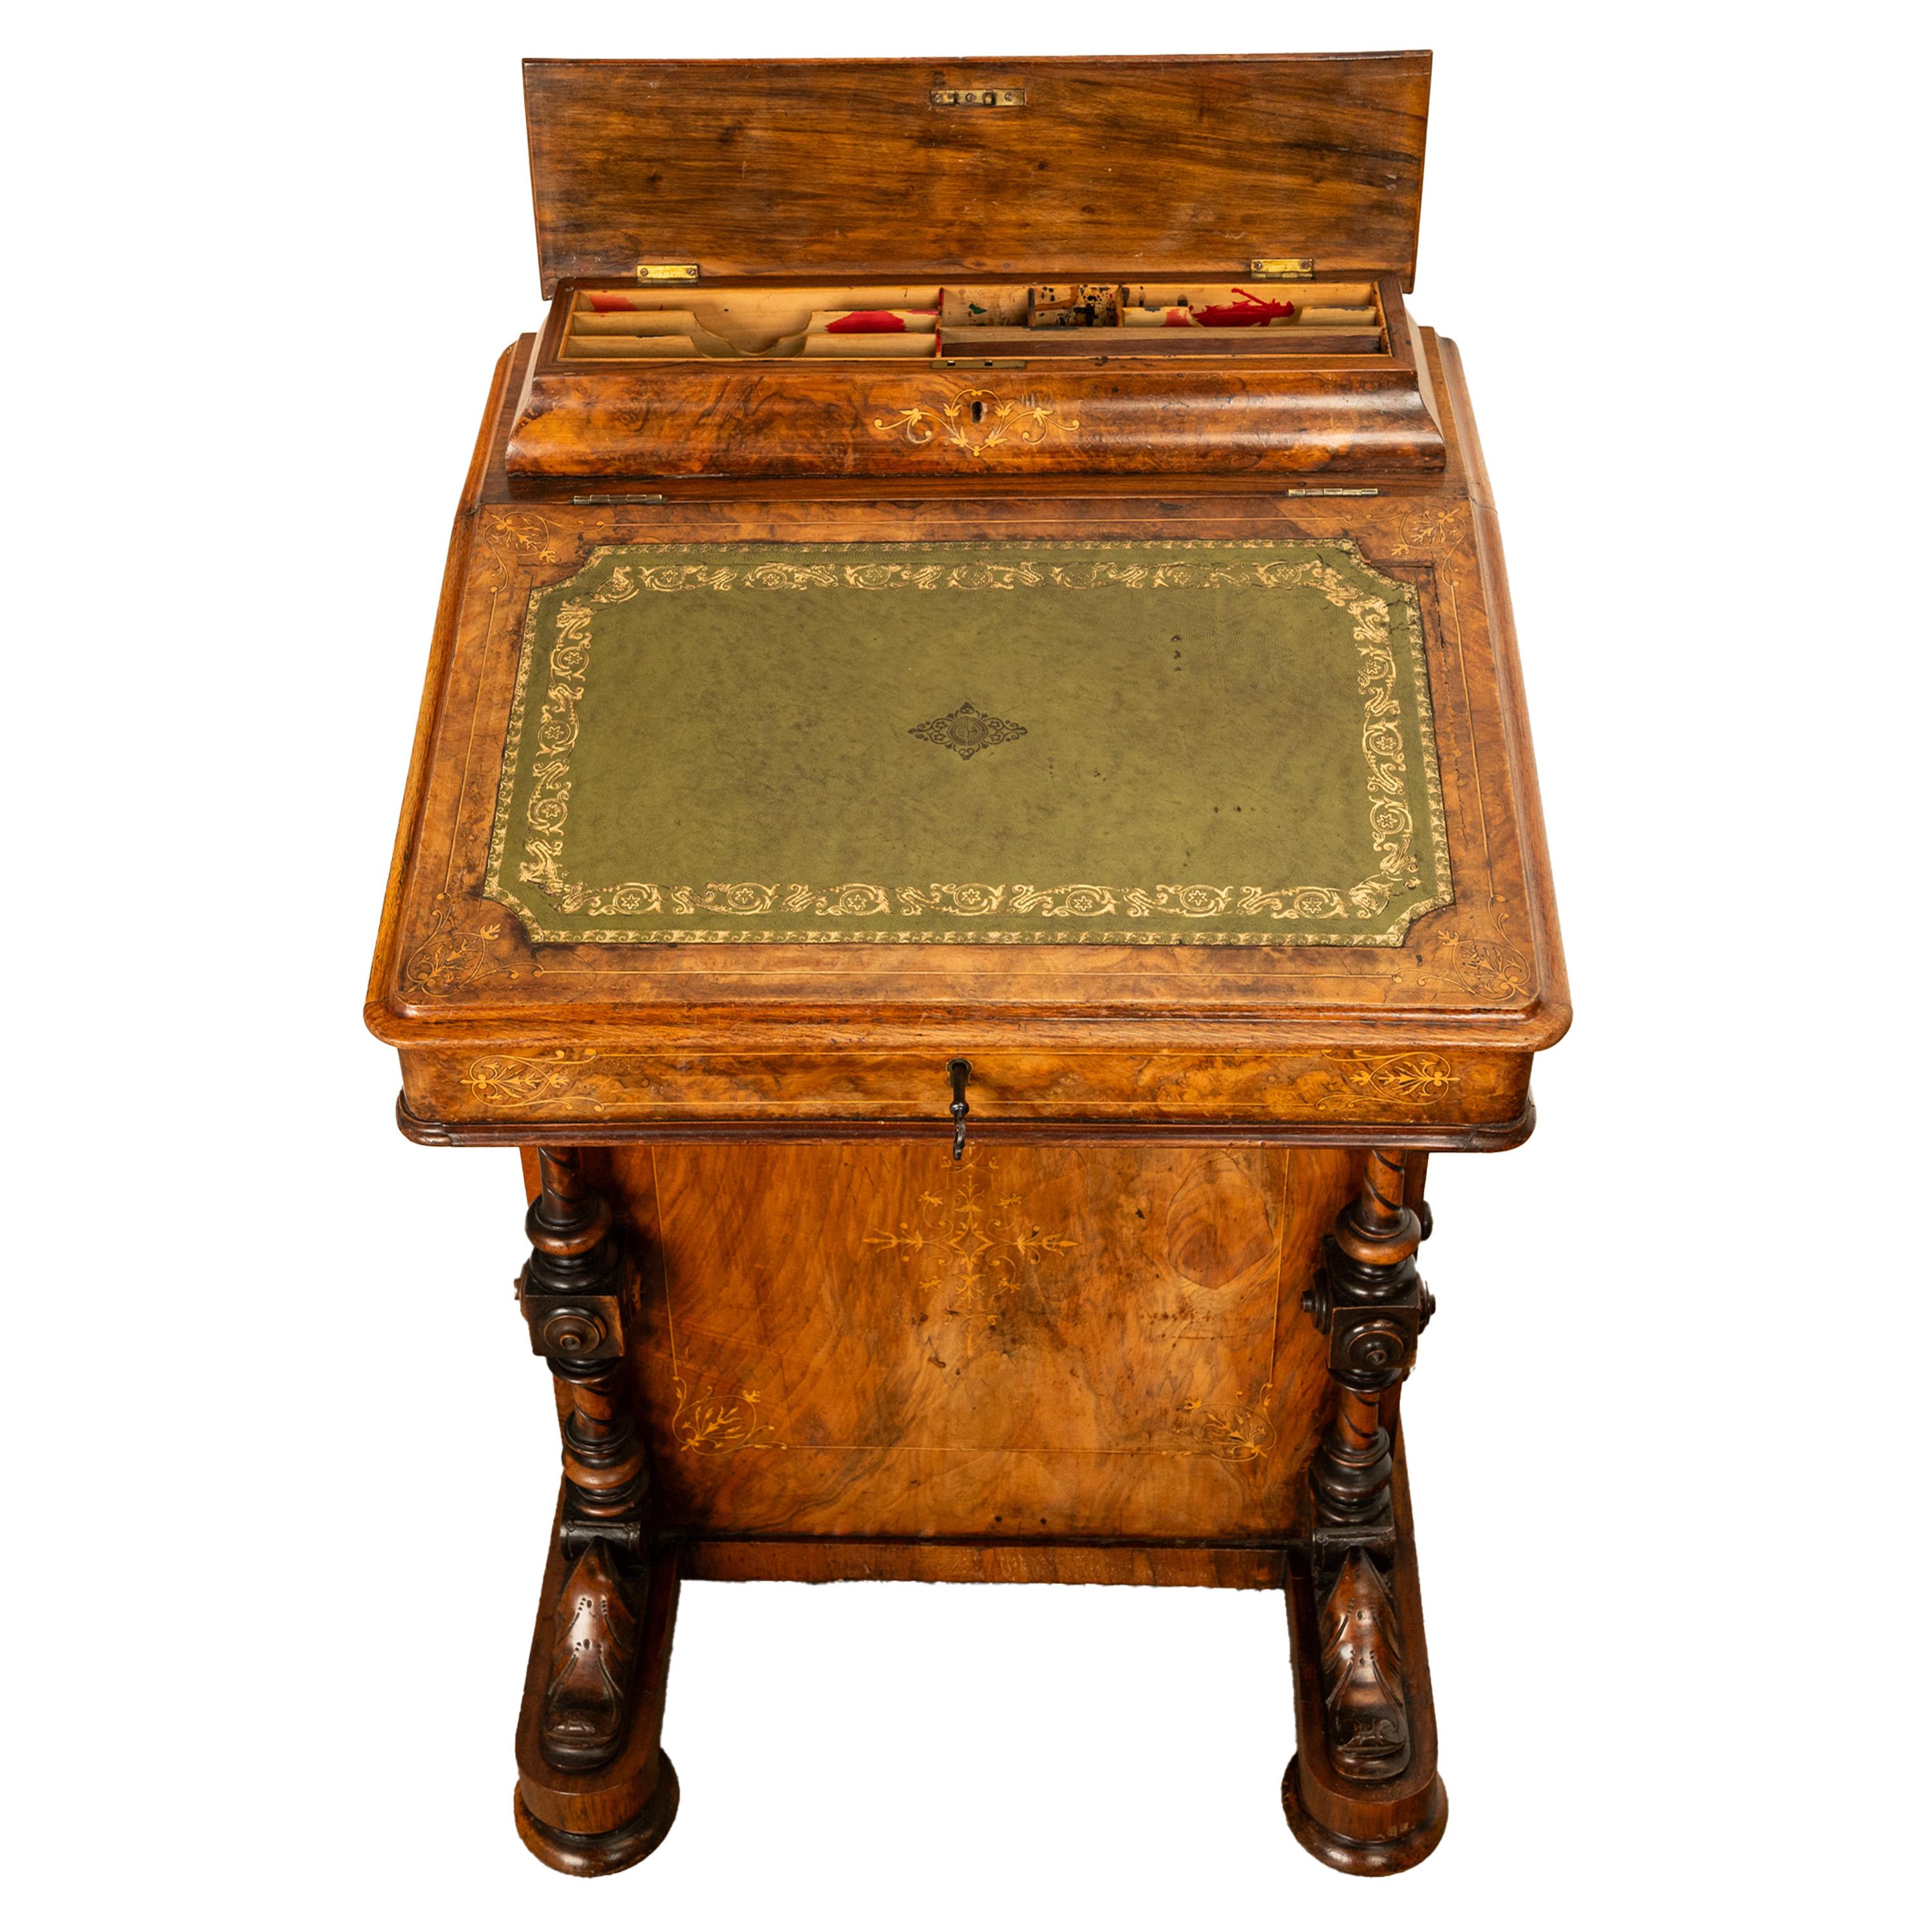 Antique Victorian Burl Walnut Inlaid Marquetry Carved Davenport Desk 1860 For Sale 4